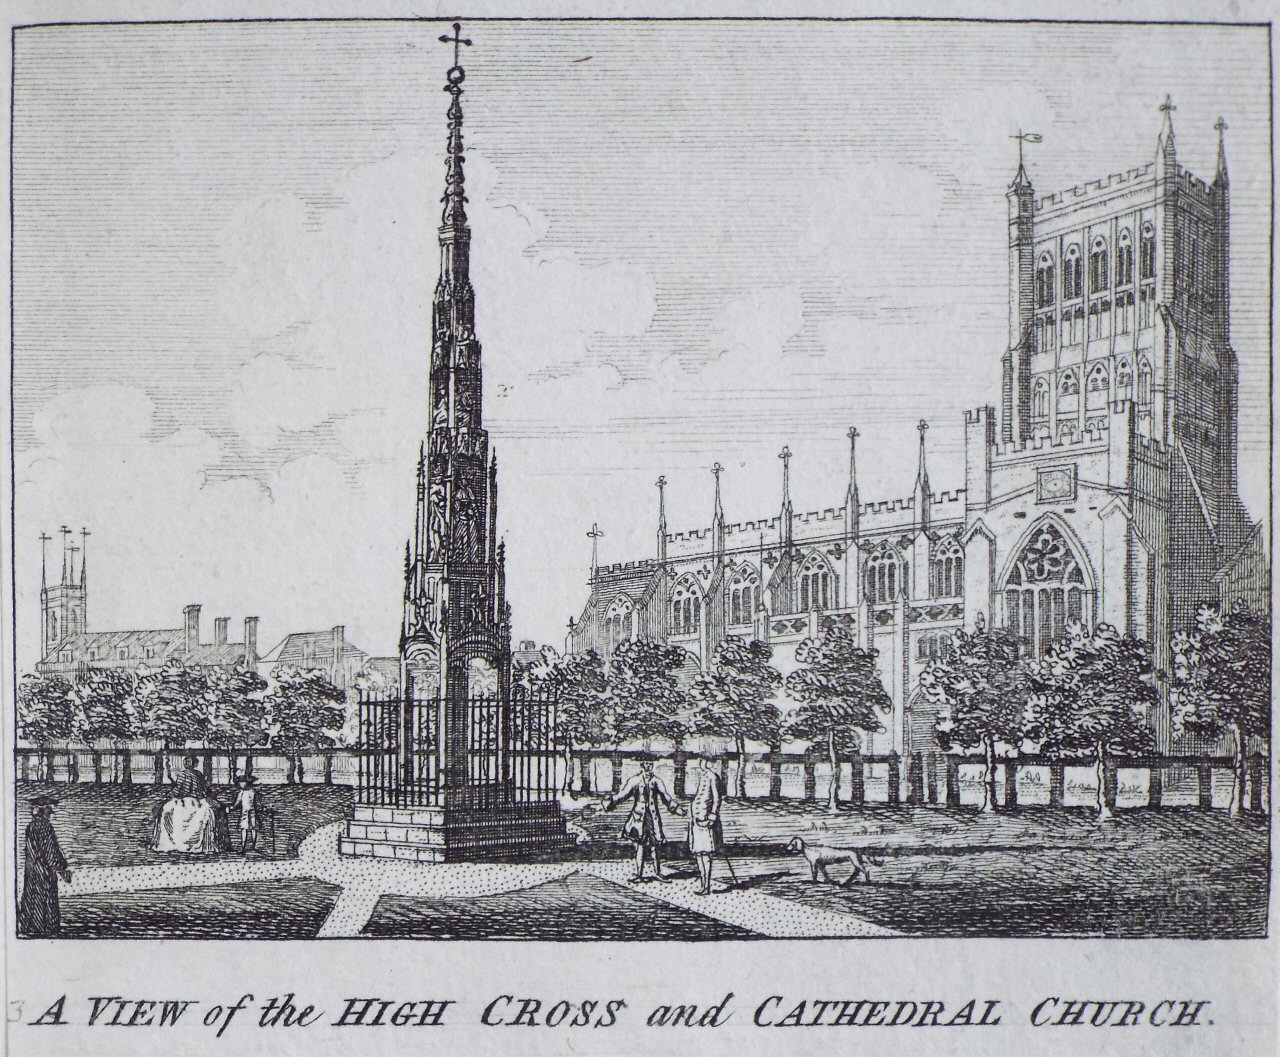 Print - A View of the High Cross and Cathedral Church.